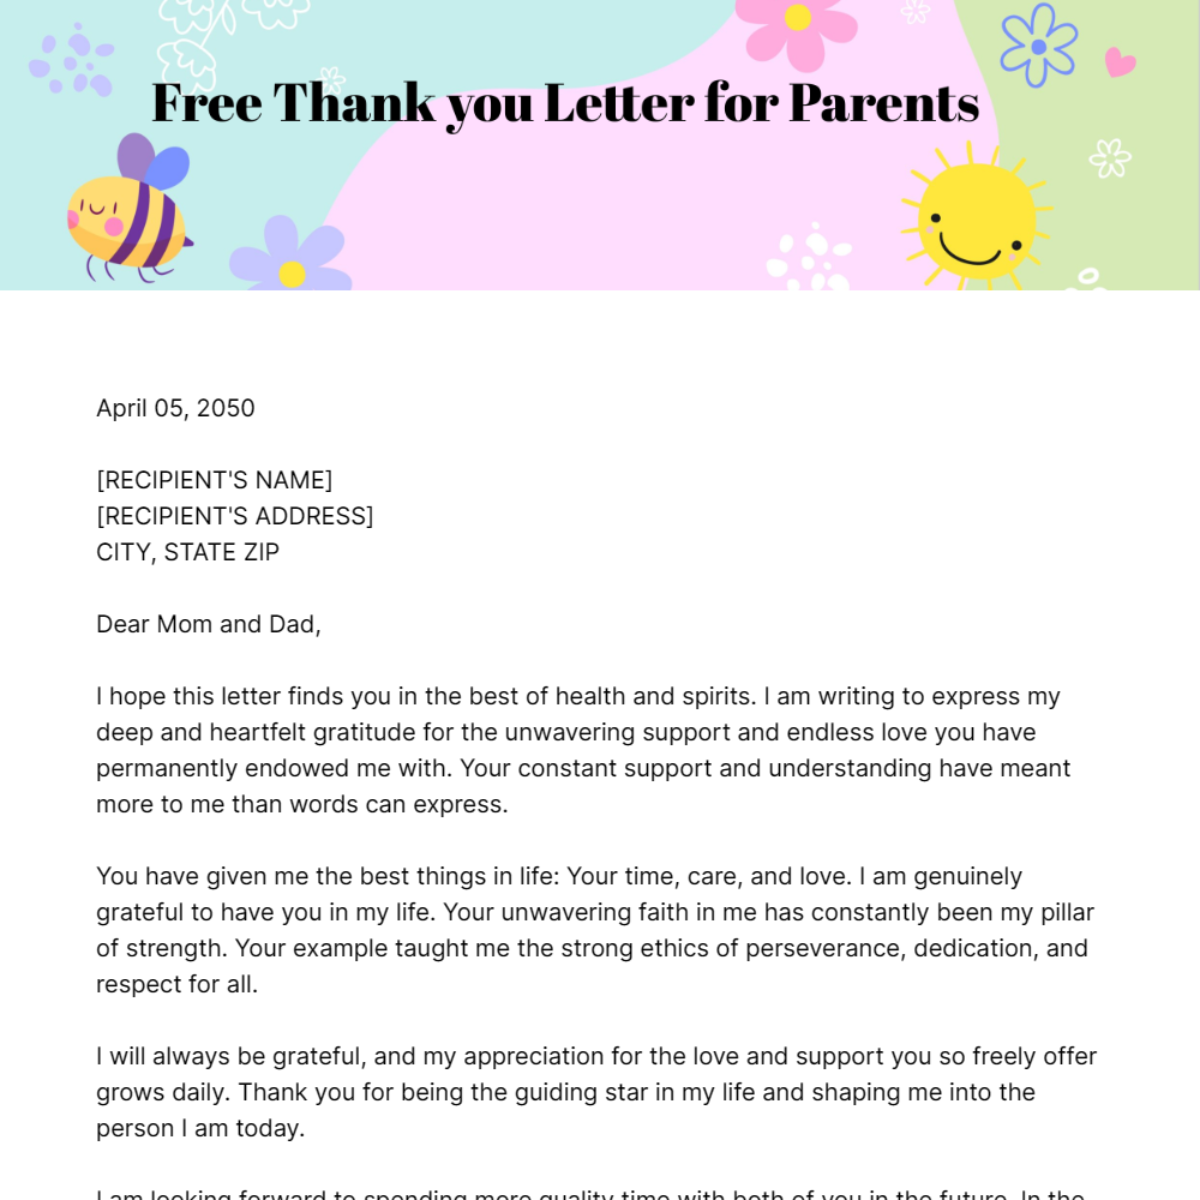 Thank you Letter for Parents Template